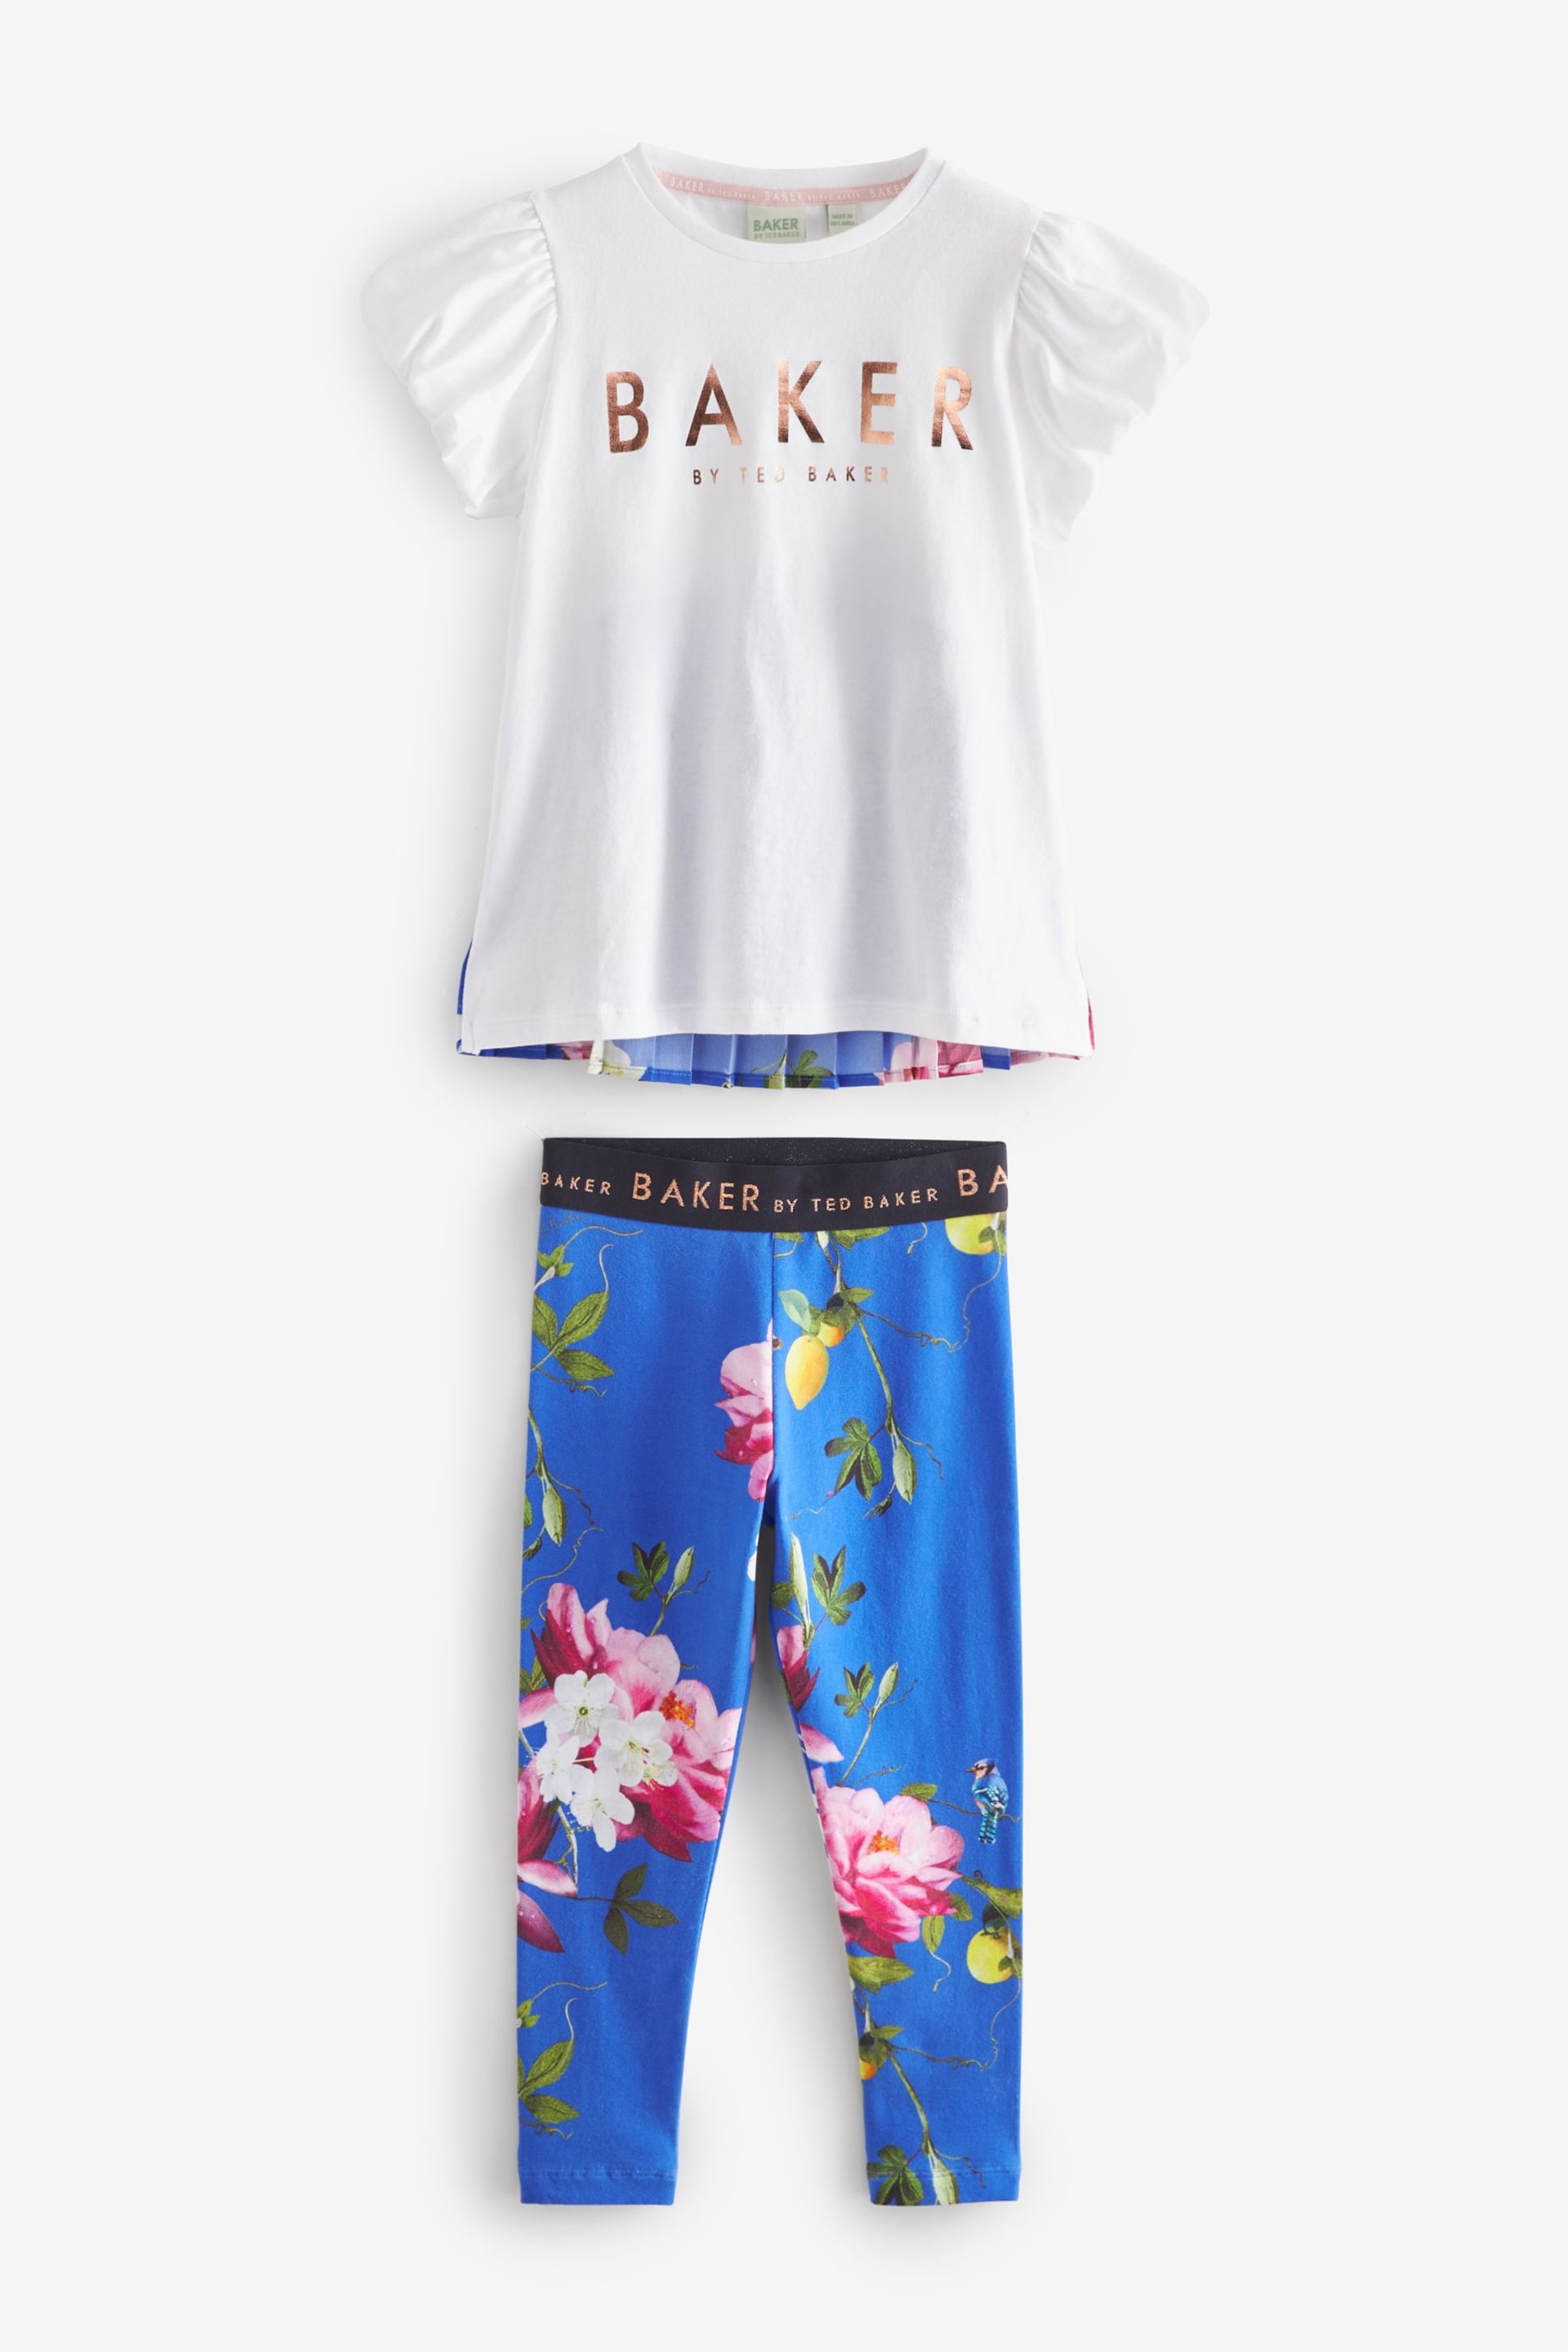 Baker by Ted Baker Pleated T-Shirt And Leggings Set - Image 9 of 13